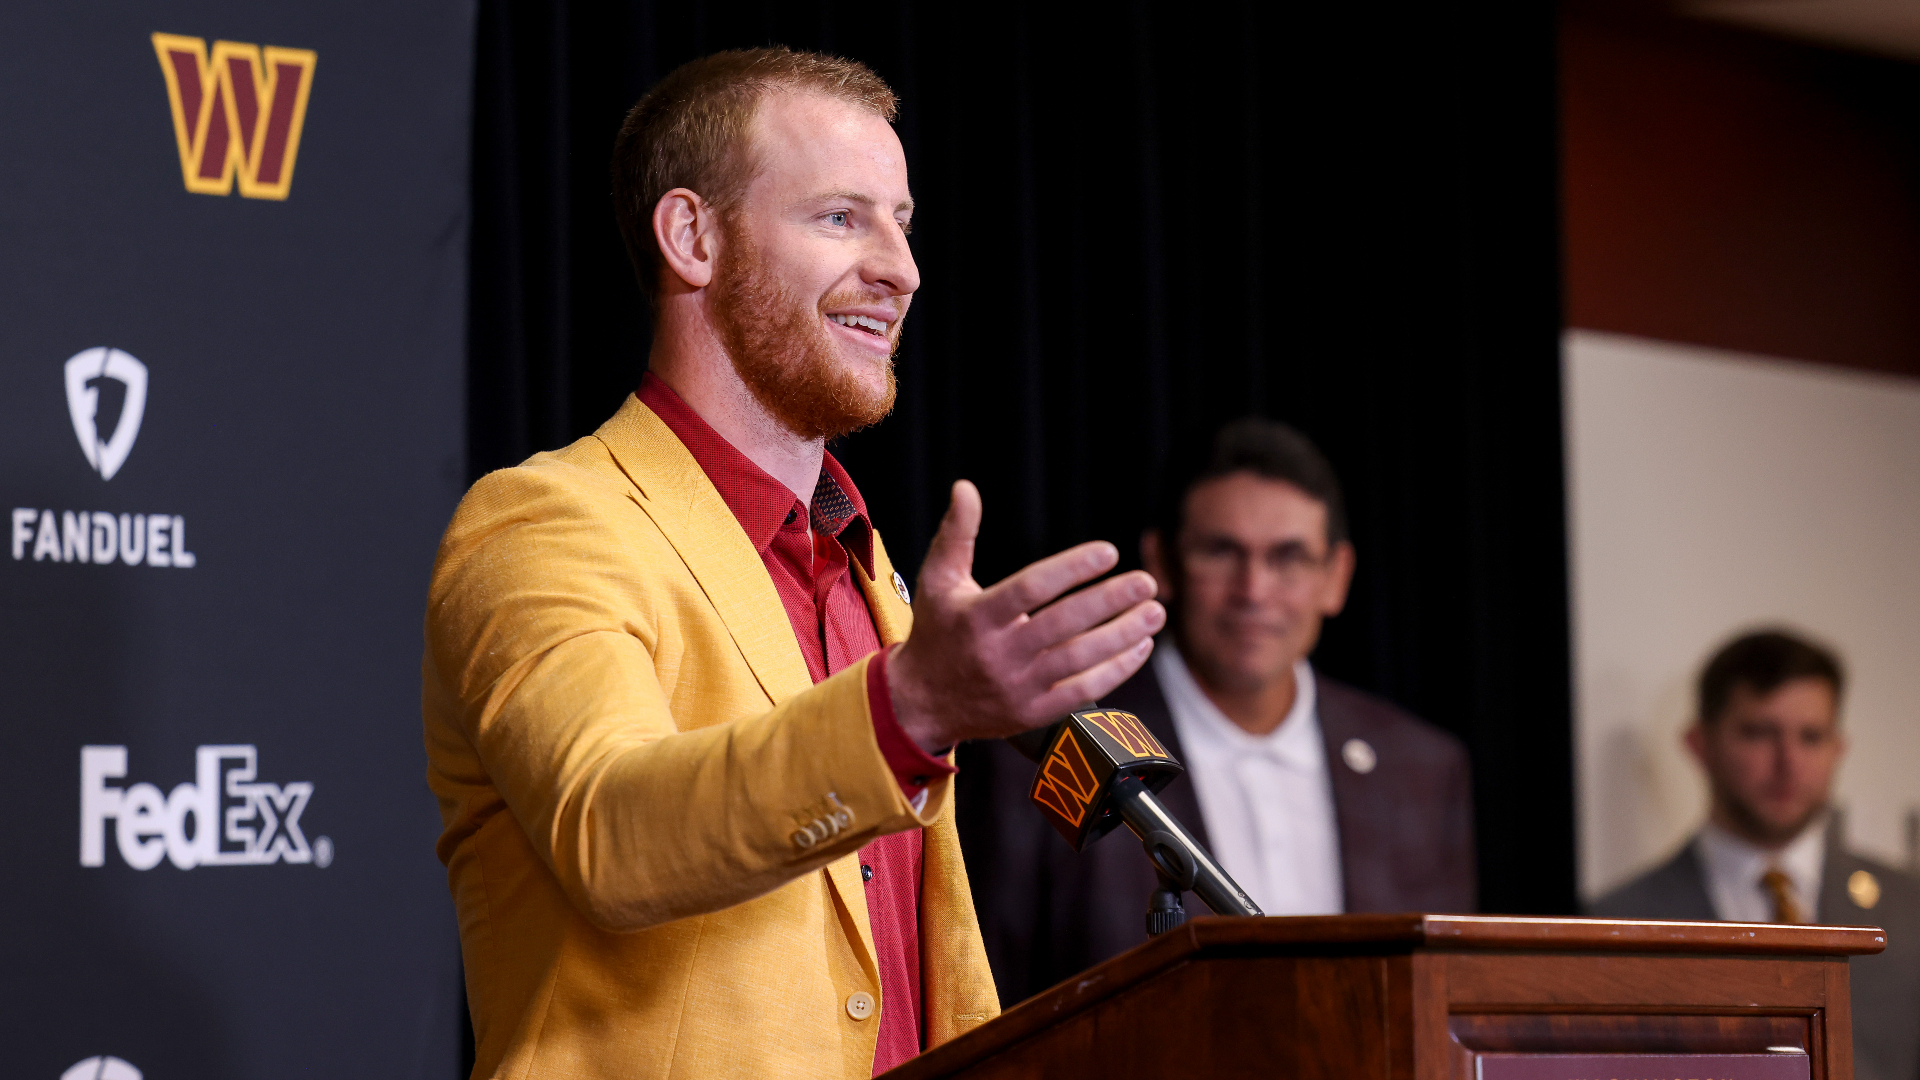 Wentz with Ron in background